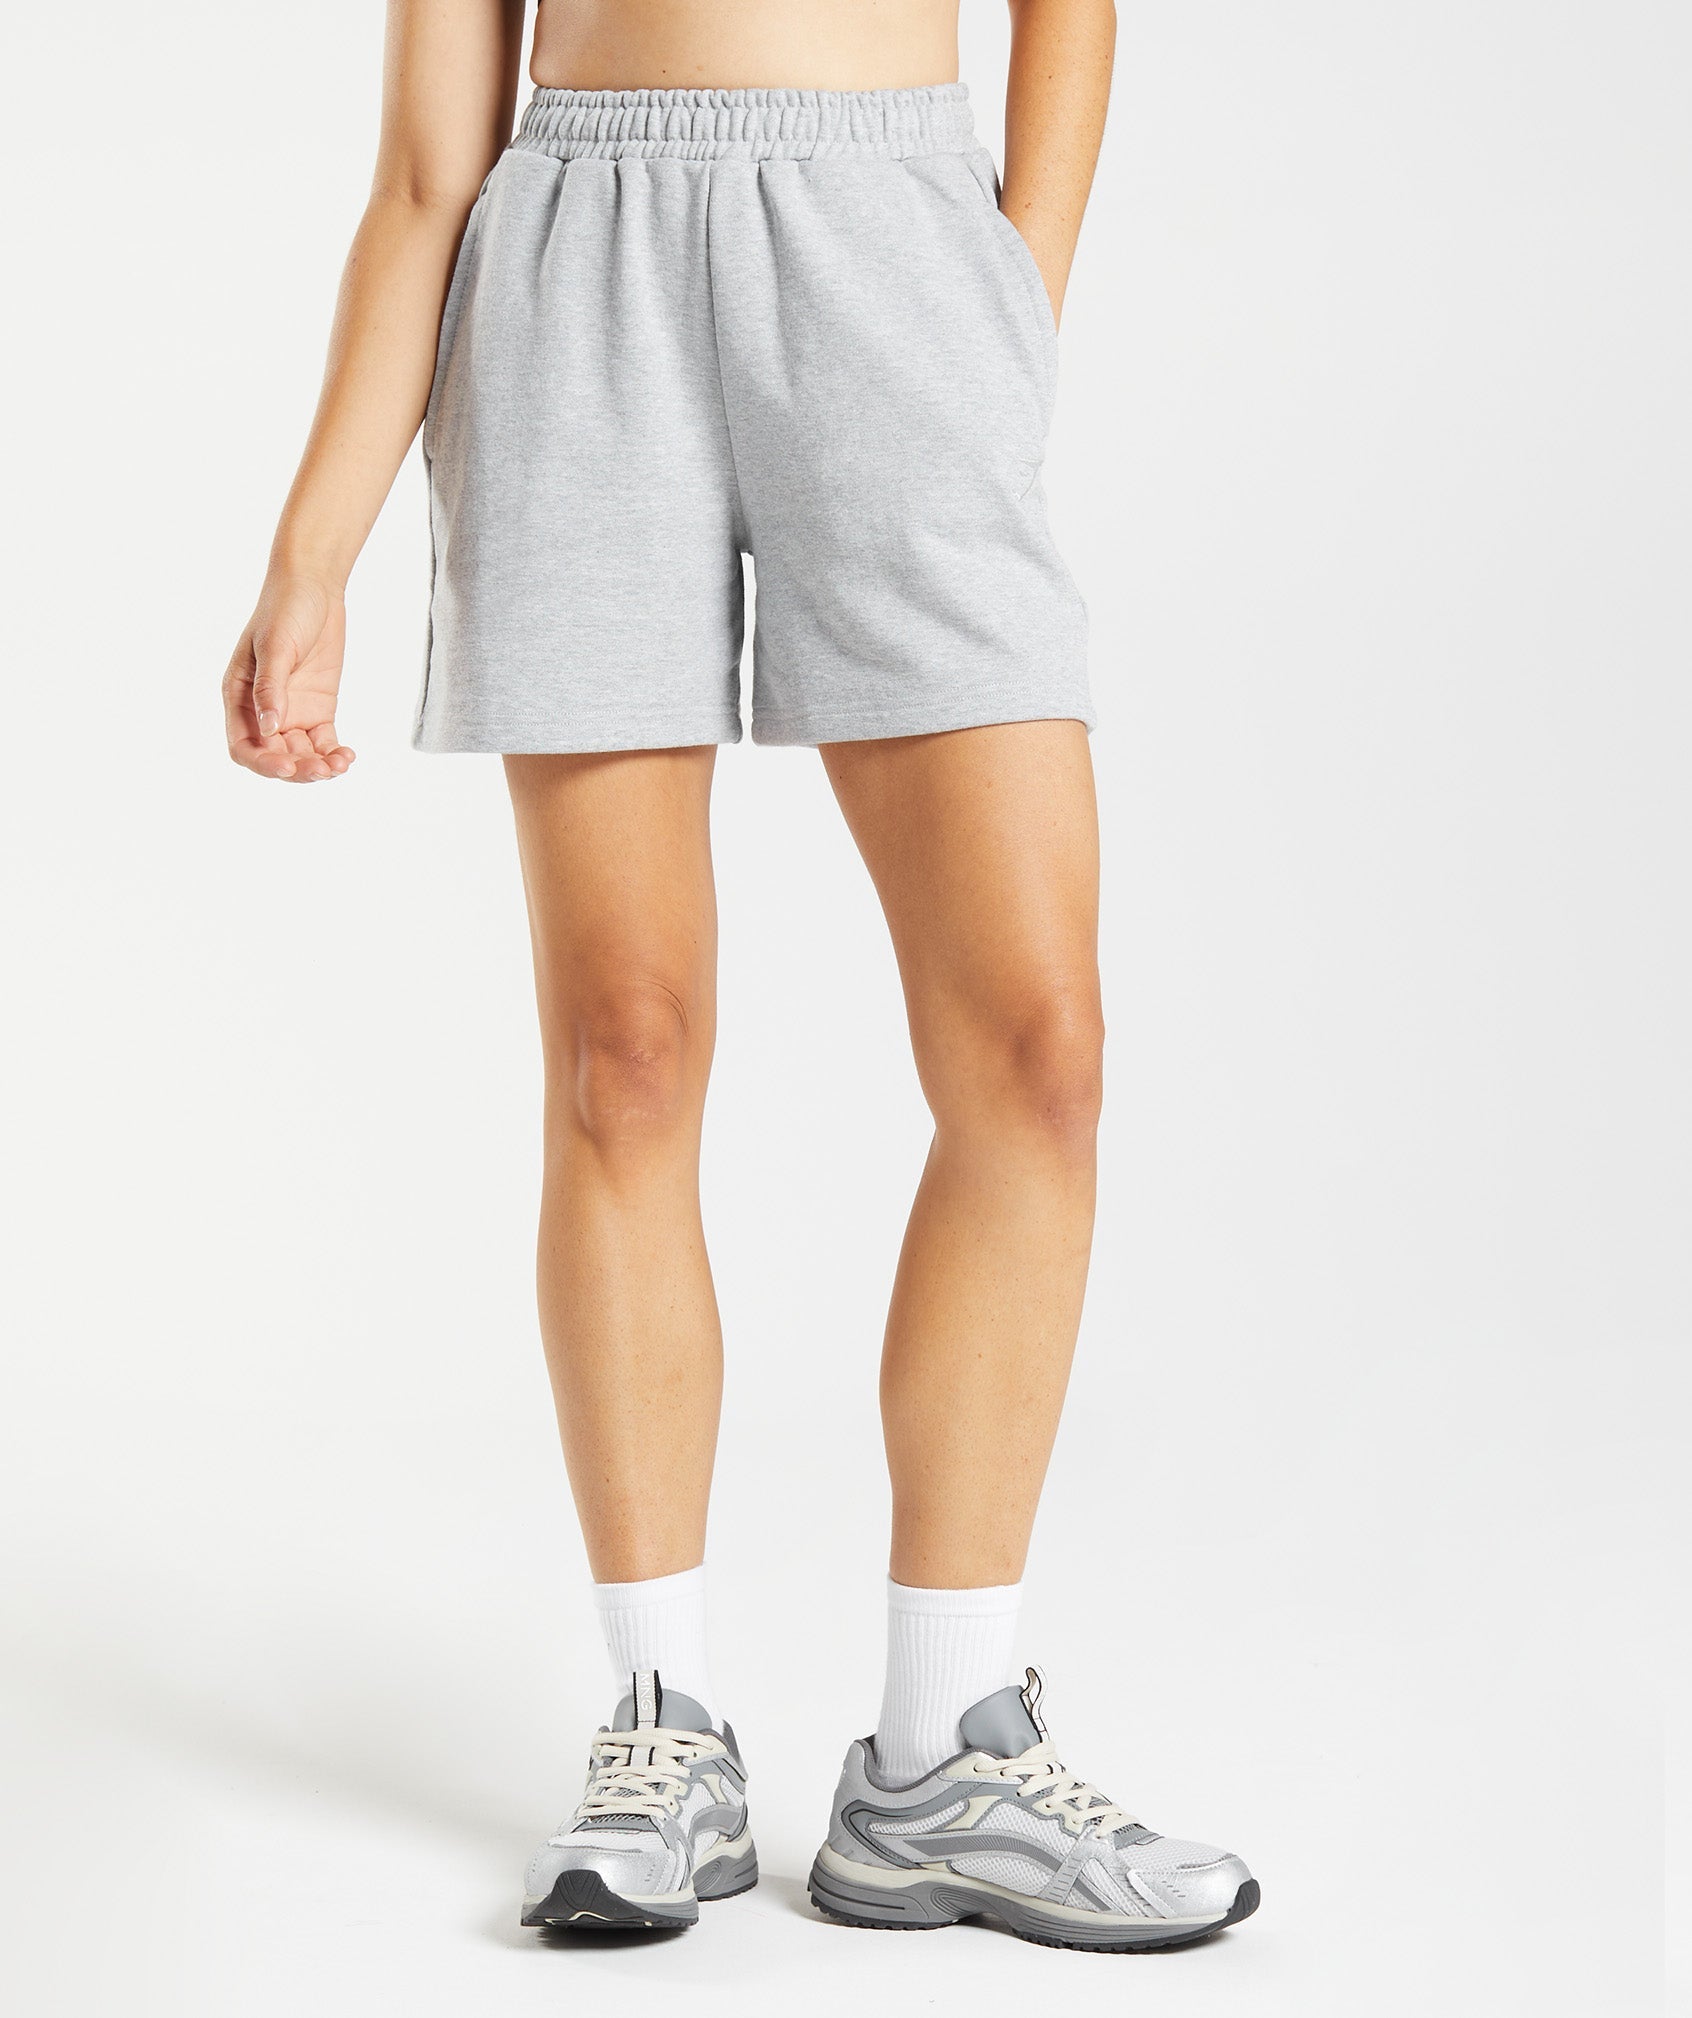 Rest Day Sweats Shorts in Light Grey Core Marl - view 1